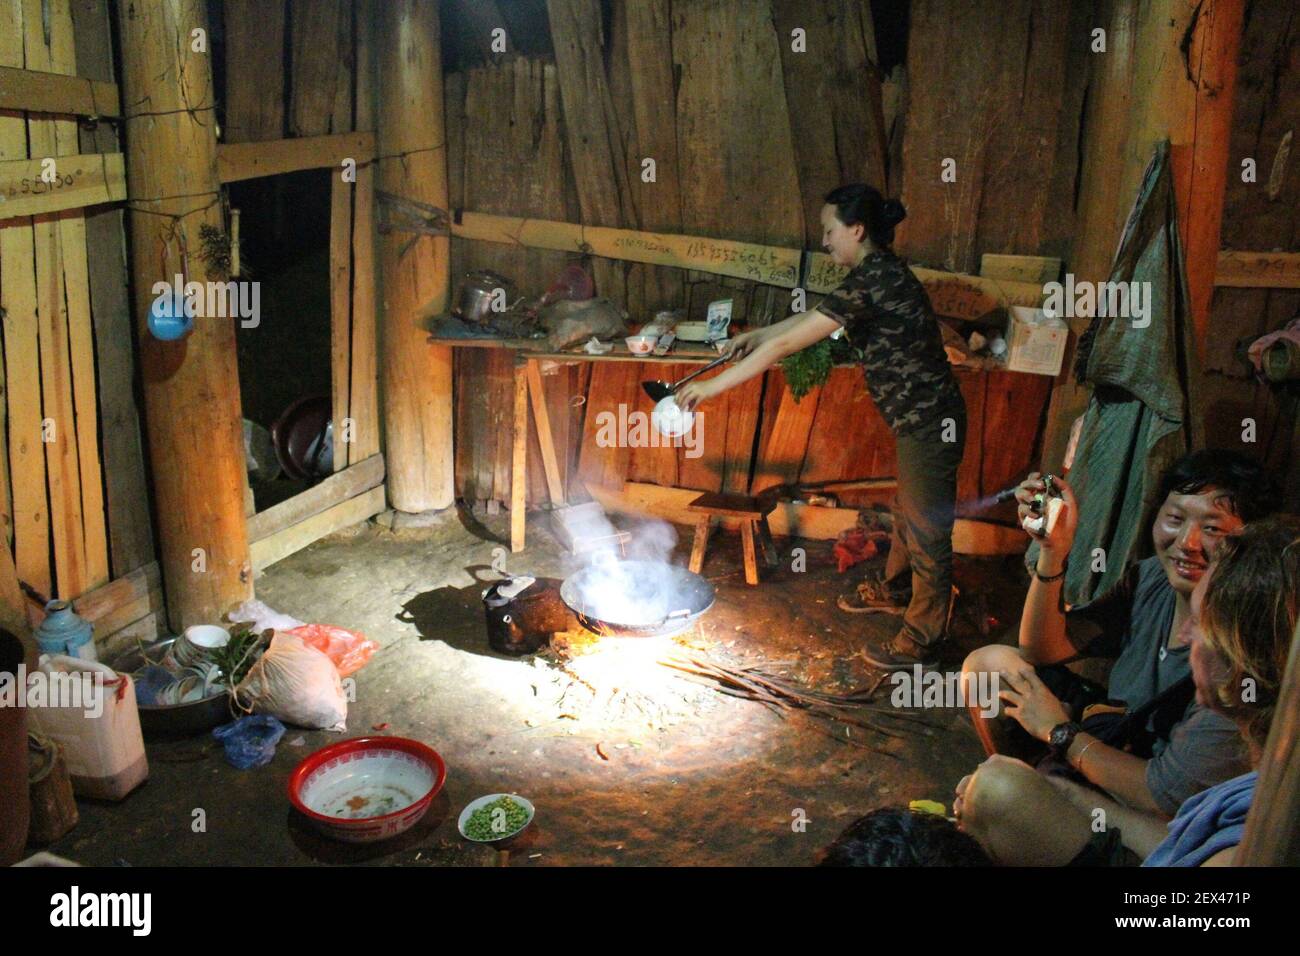 Wang Fang, a teacher and part-time tour guide, prepares dinner in a Miao farm house in the hills above Rongjiang in Guizhou province, China, on April 4, 2015. The Miao, who are related to the Hmong in other parts of Asia, typically cook over open fires, subsisting on rice, vegetables, tofu, salted pork, pickled fish and other local staples. Wang Fang's mother is Miao and her father is Dong, another ethnic group in this remote part of southern China. (Photo by Stuart Leavenworth/McClatchy DC/TNS) *** Please Use Credit from Credit Field *** Stock Photo